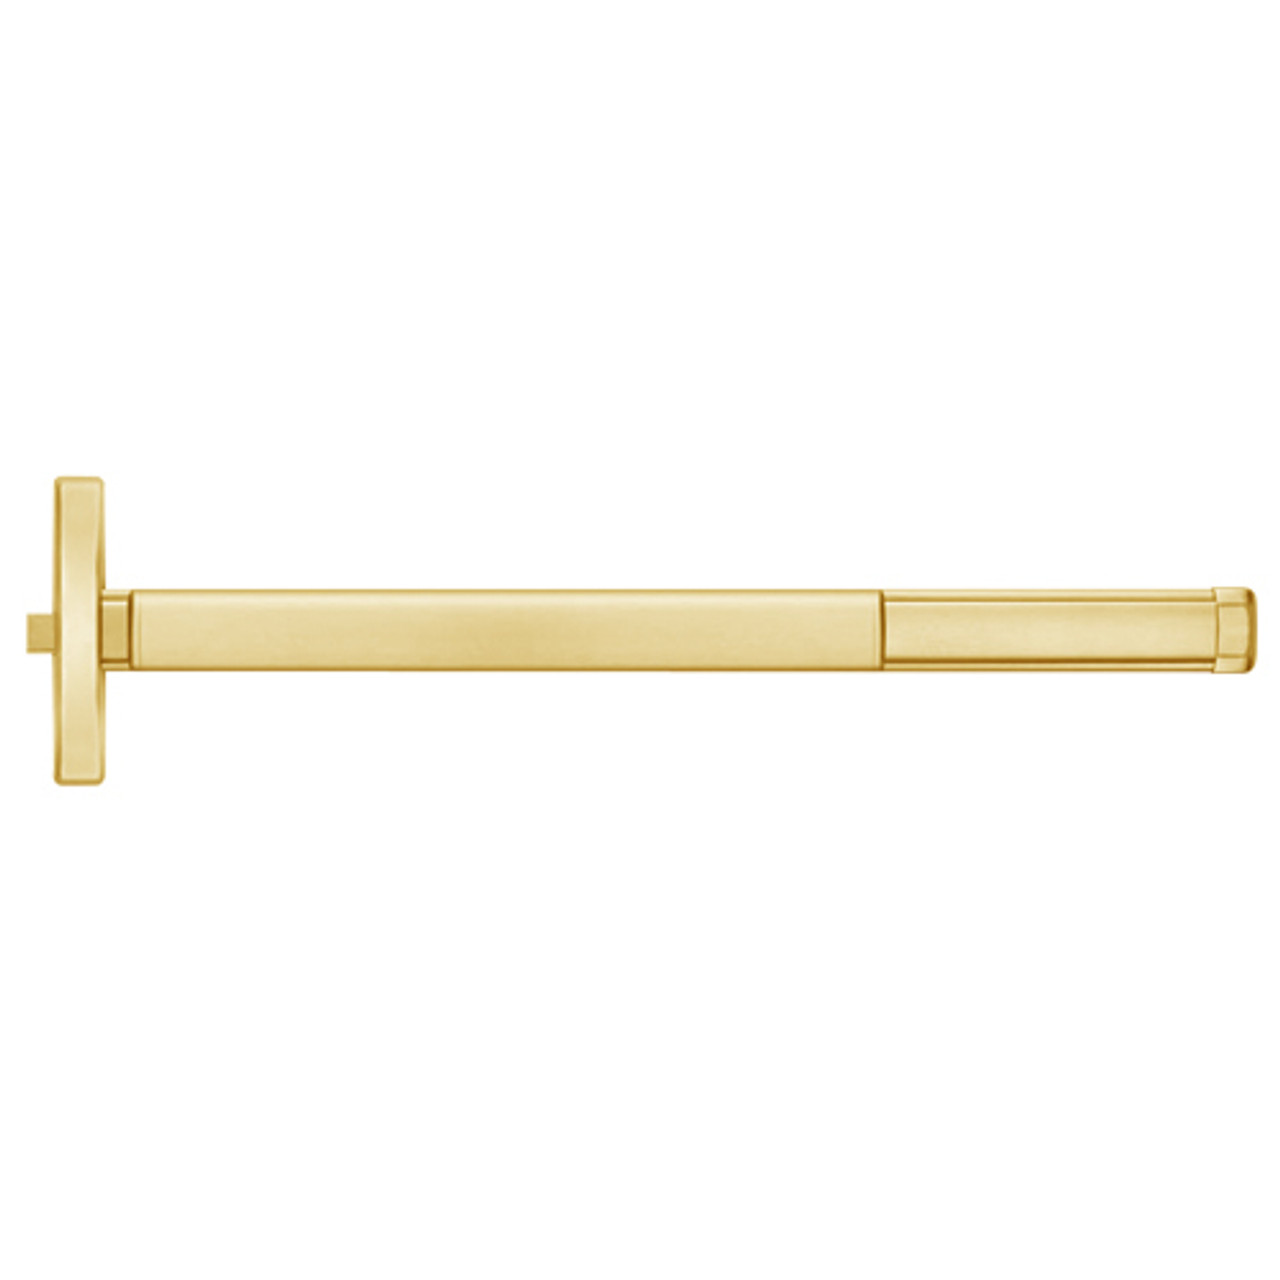 DE2403-605-36 PHI 2400 Series Non Fire Rated Apex Rim Exit Device with Delayed Egress Prepped for Key Retracts Latchbolt in Bright Brass Finish